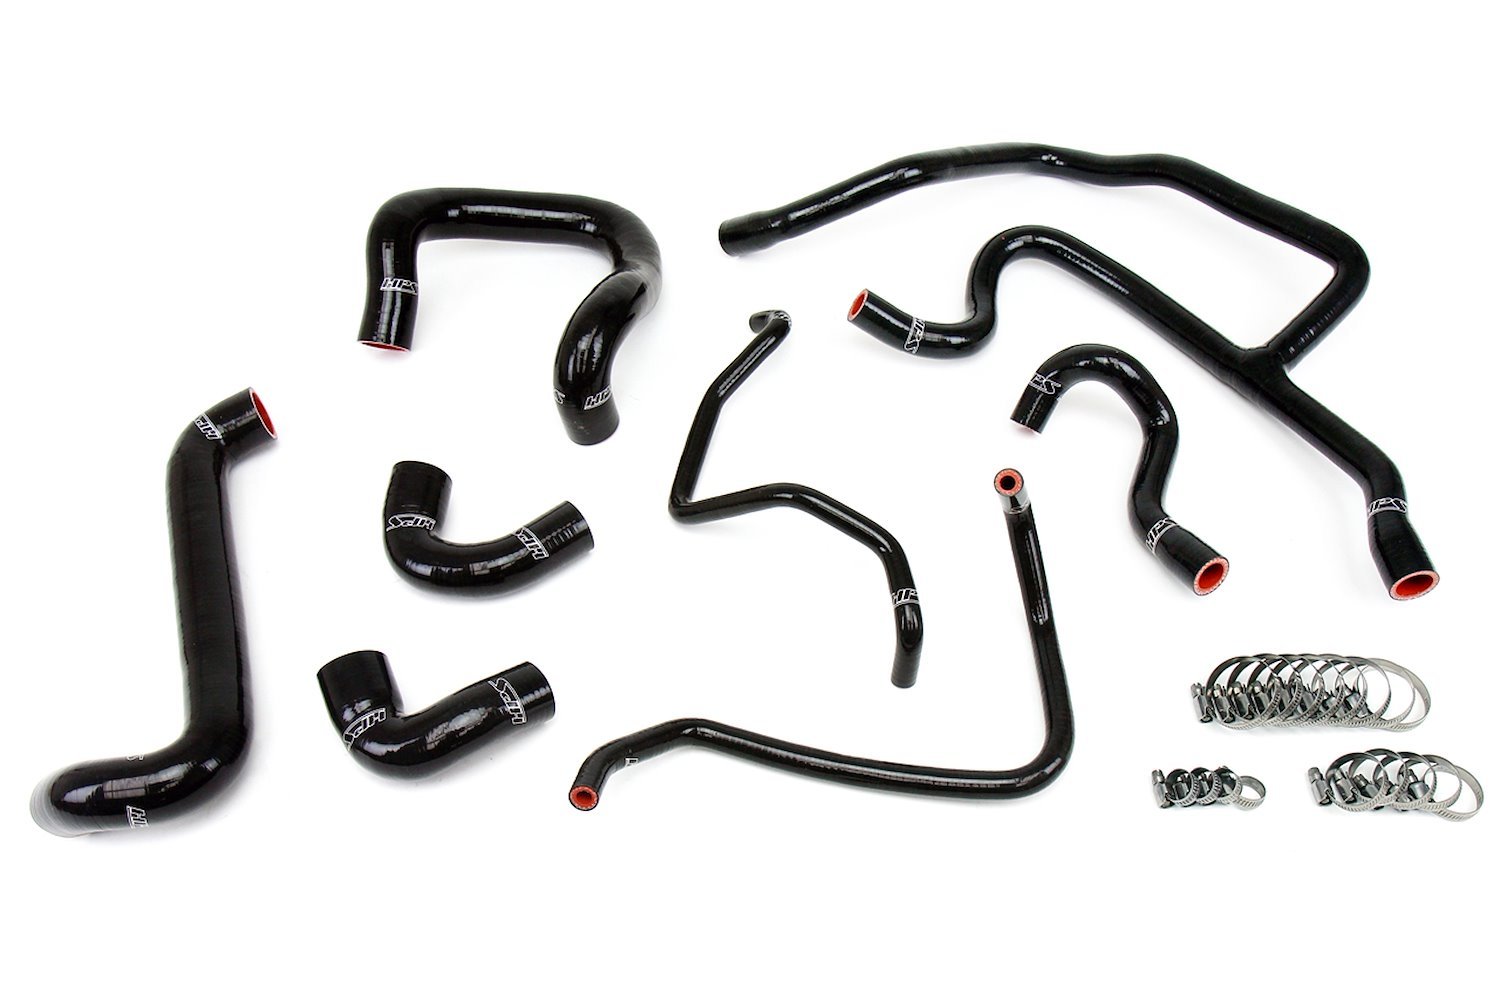 57-1427-BLK Coolant Hose Kit, High-Temp 3-Ply Reinforced Silicone, Replace Rubber Radiator Heater Coolant Hoses